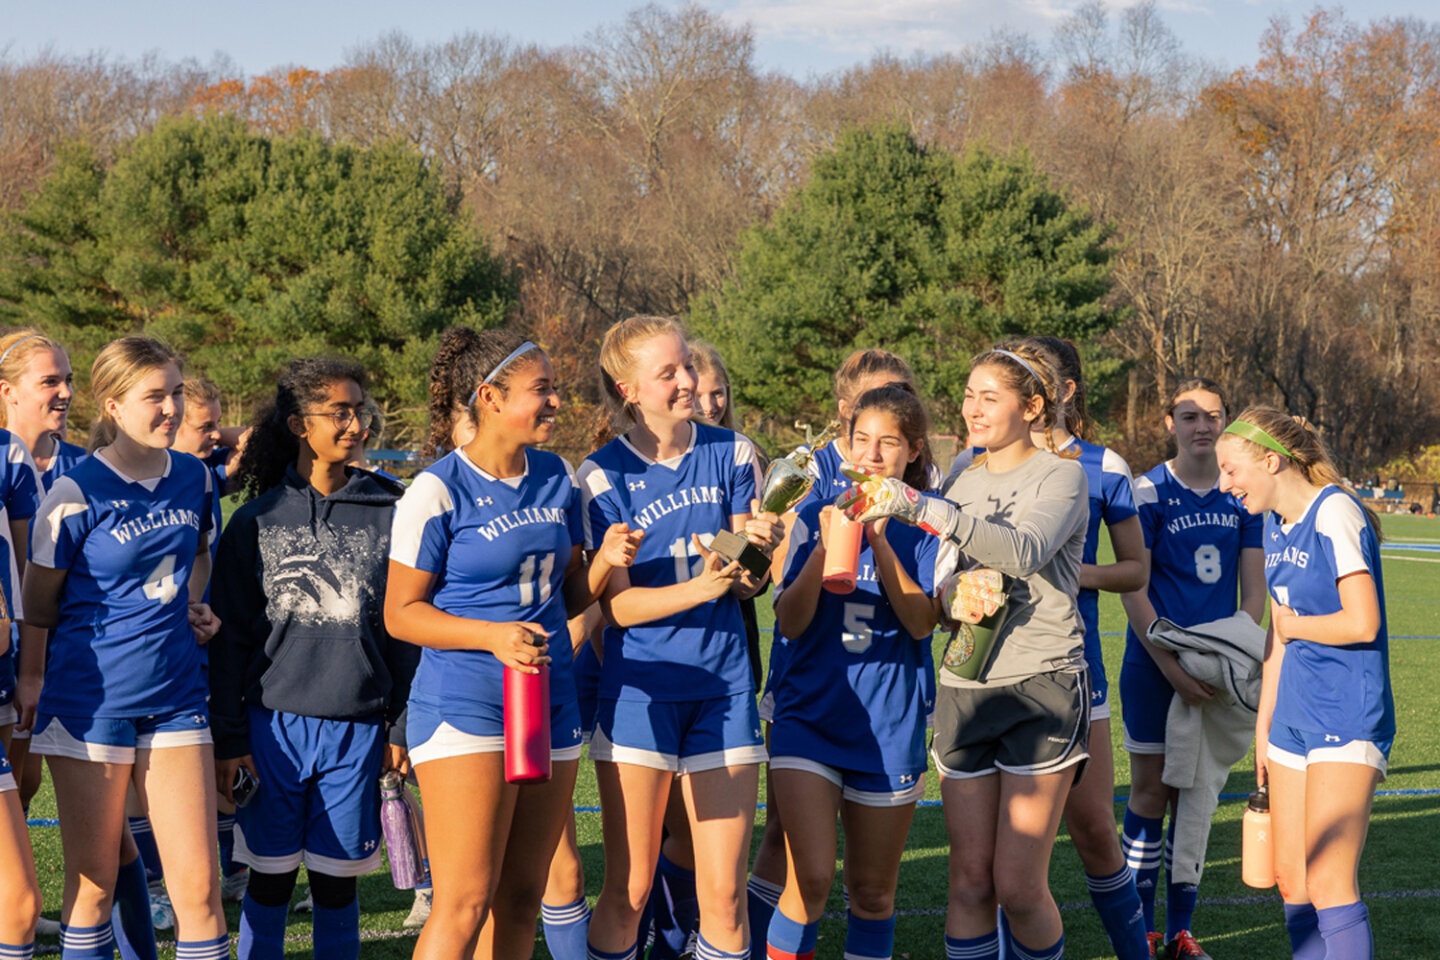 Girls soccer team celebrates win with trophy